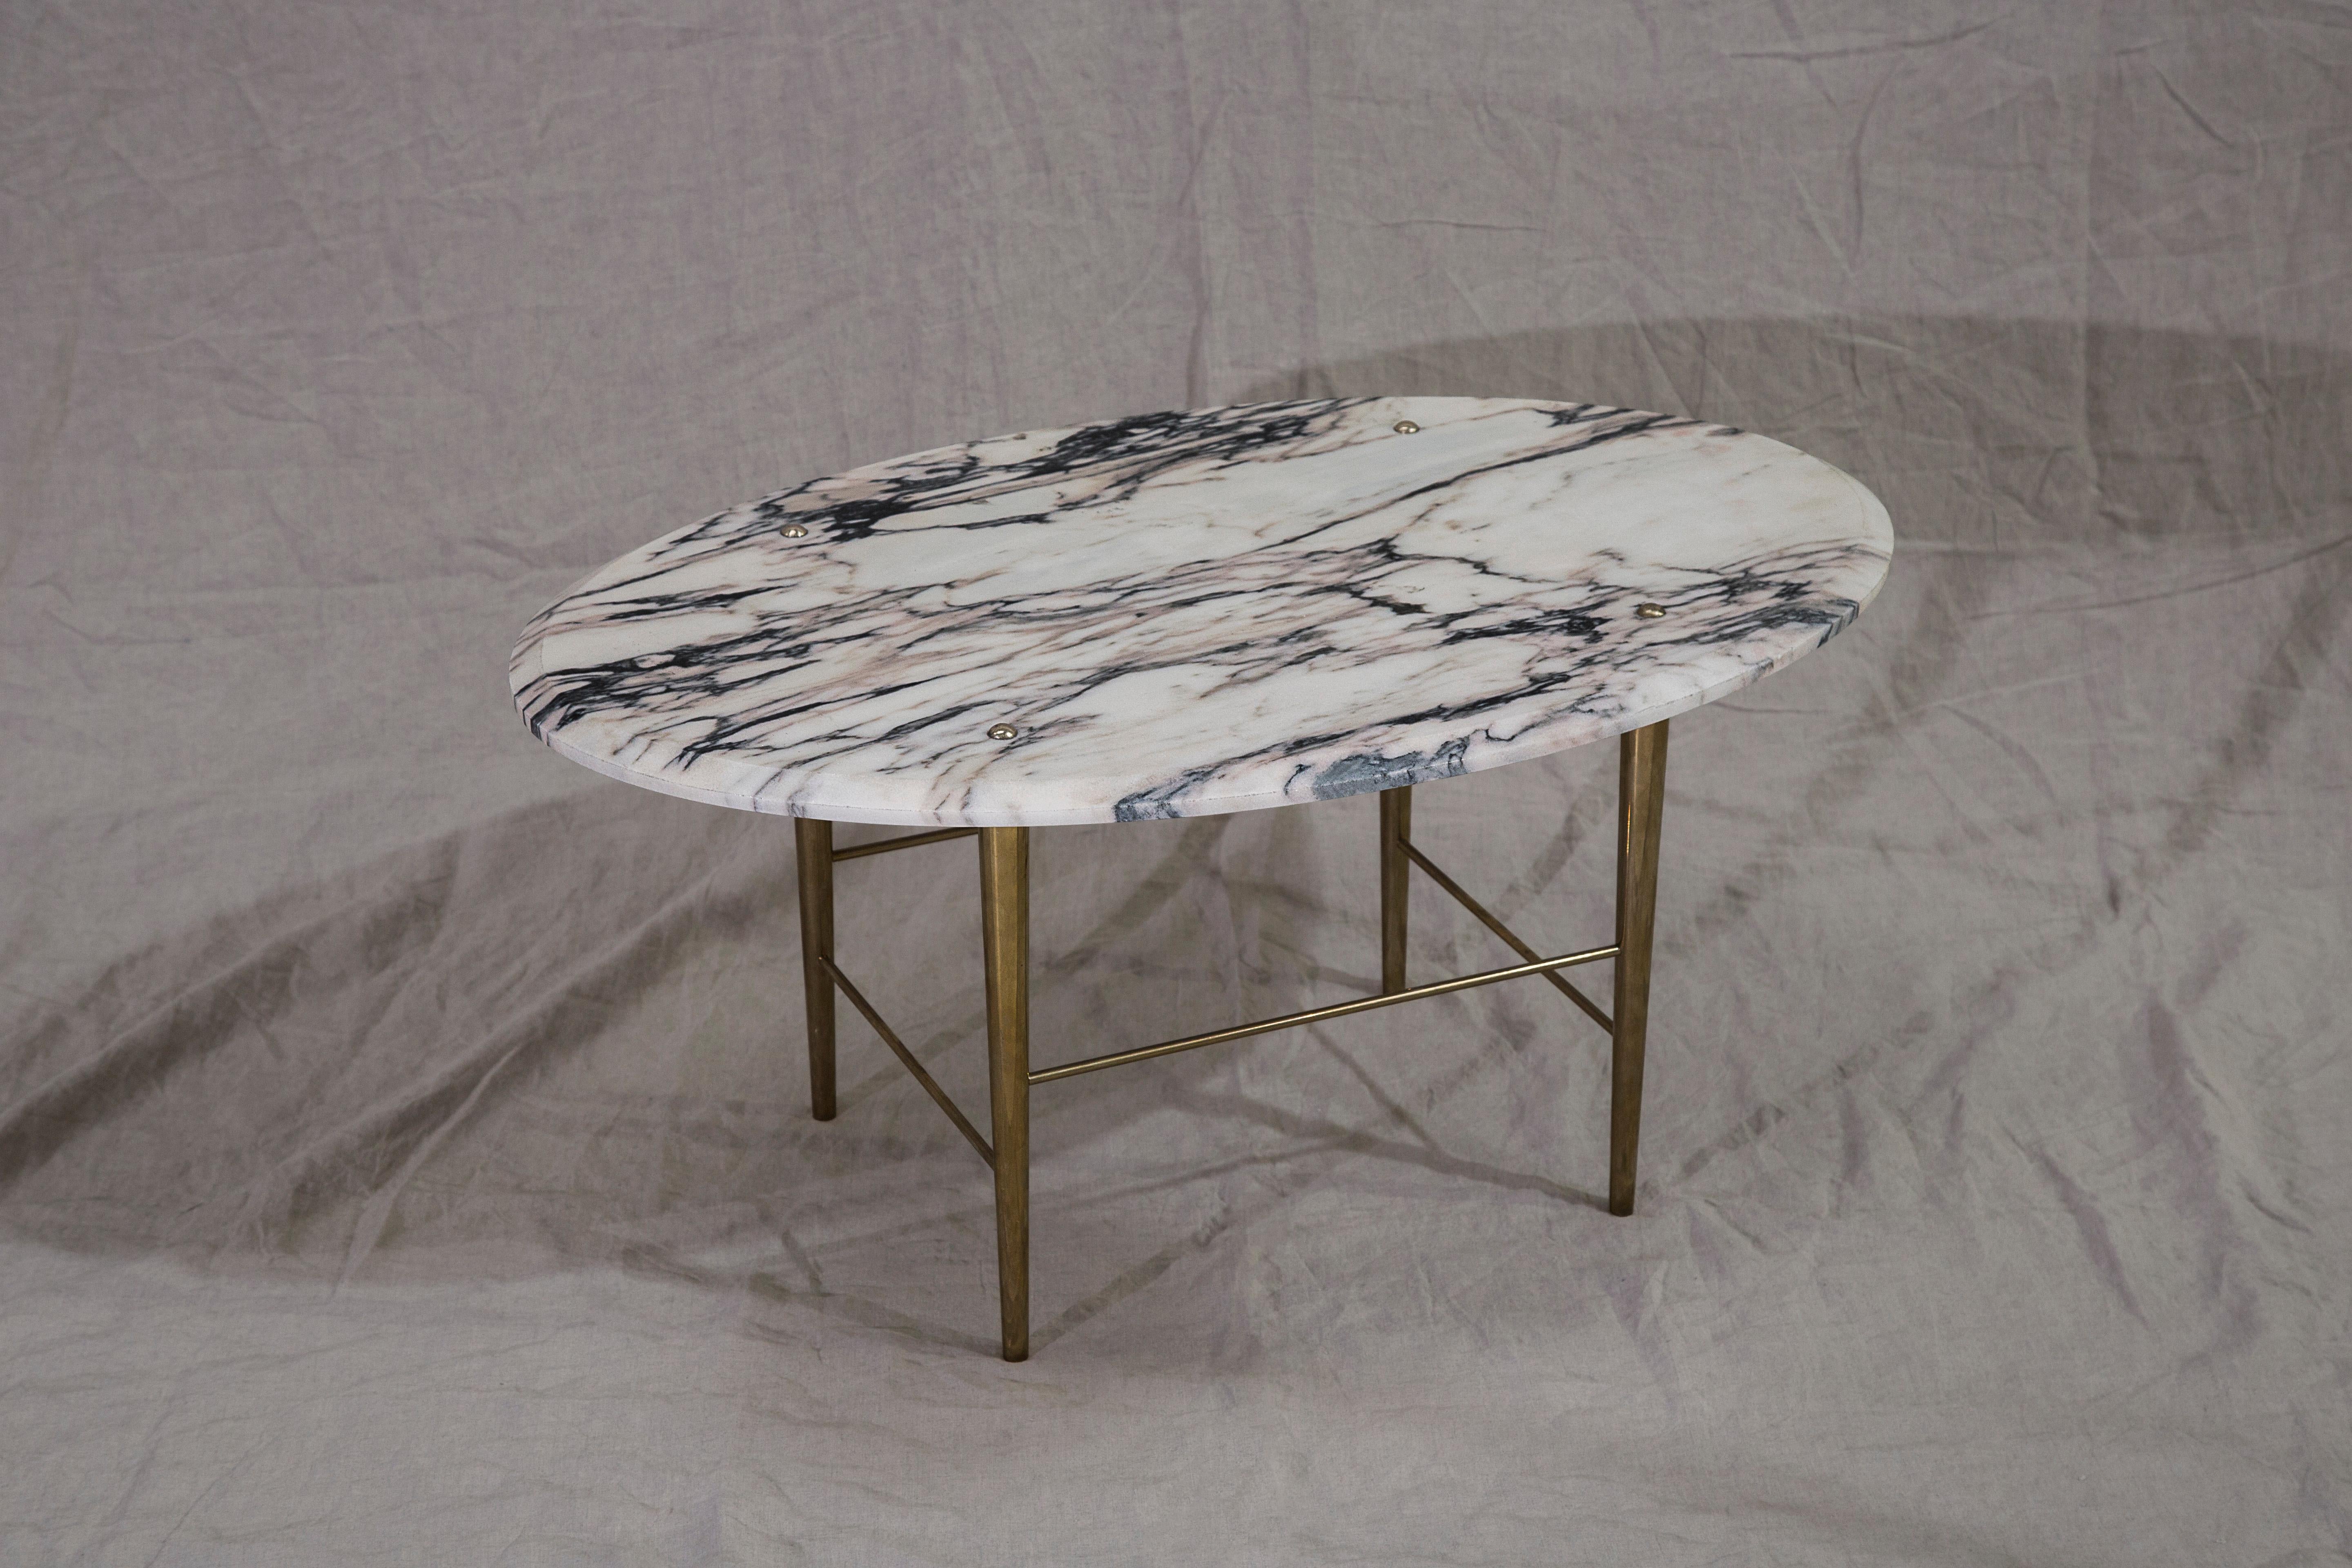 A coffee table in Portuguese marble and polished brass. handcrafted to order in Northern England.

Measures: 800 mm (L) x 500 mm (W) x 400 mm (H)

Bespoke sizes and finishes available.